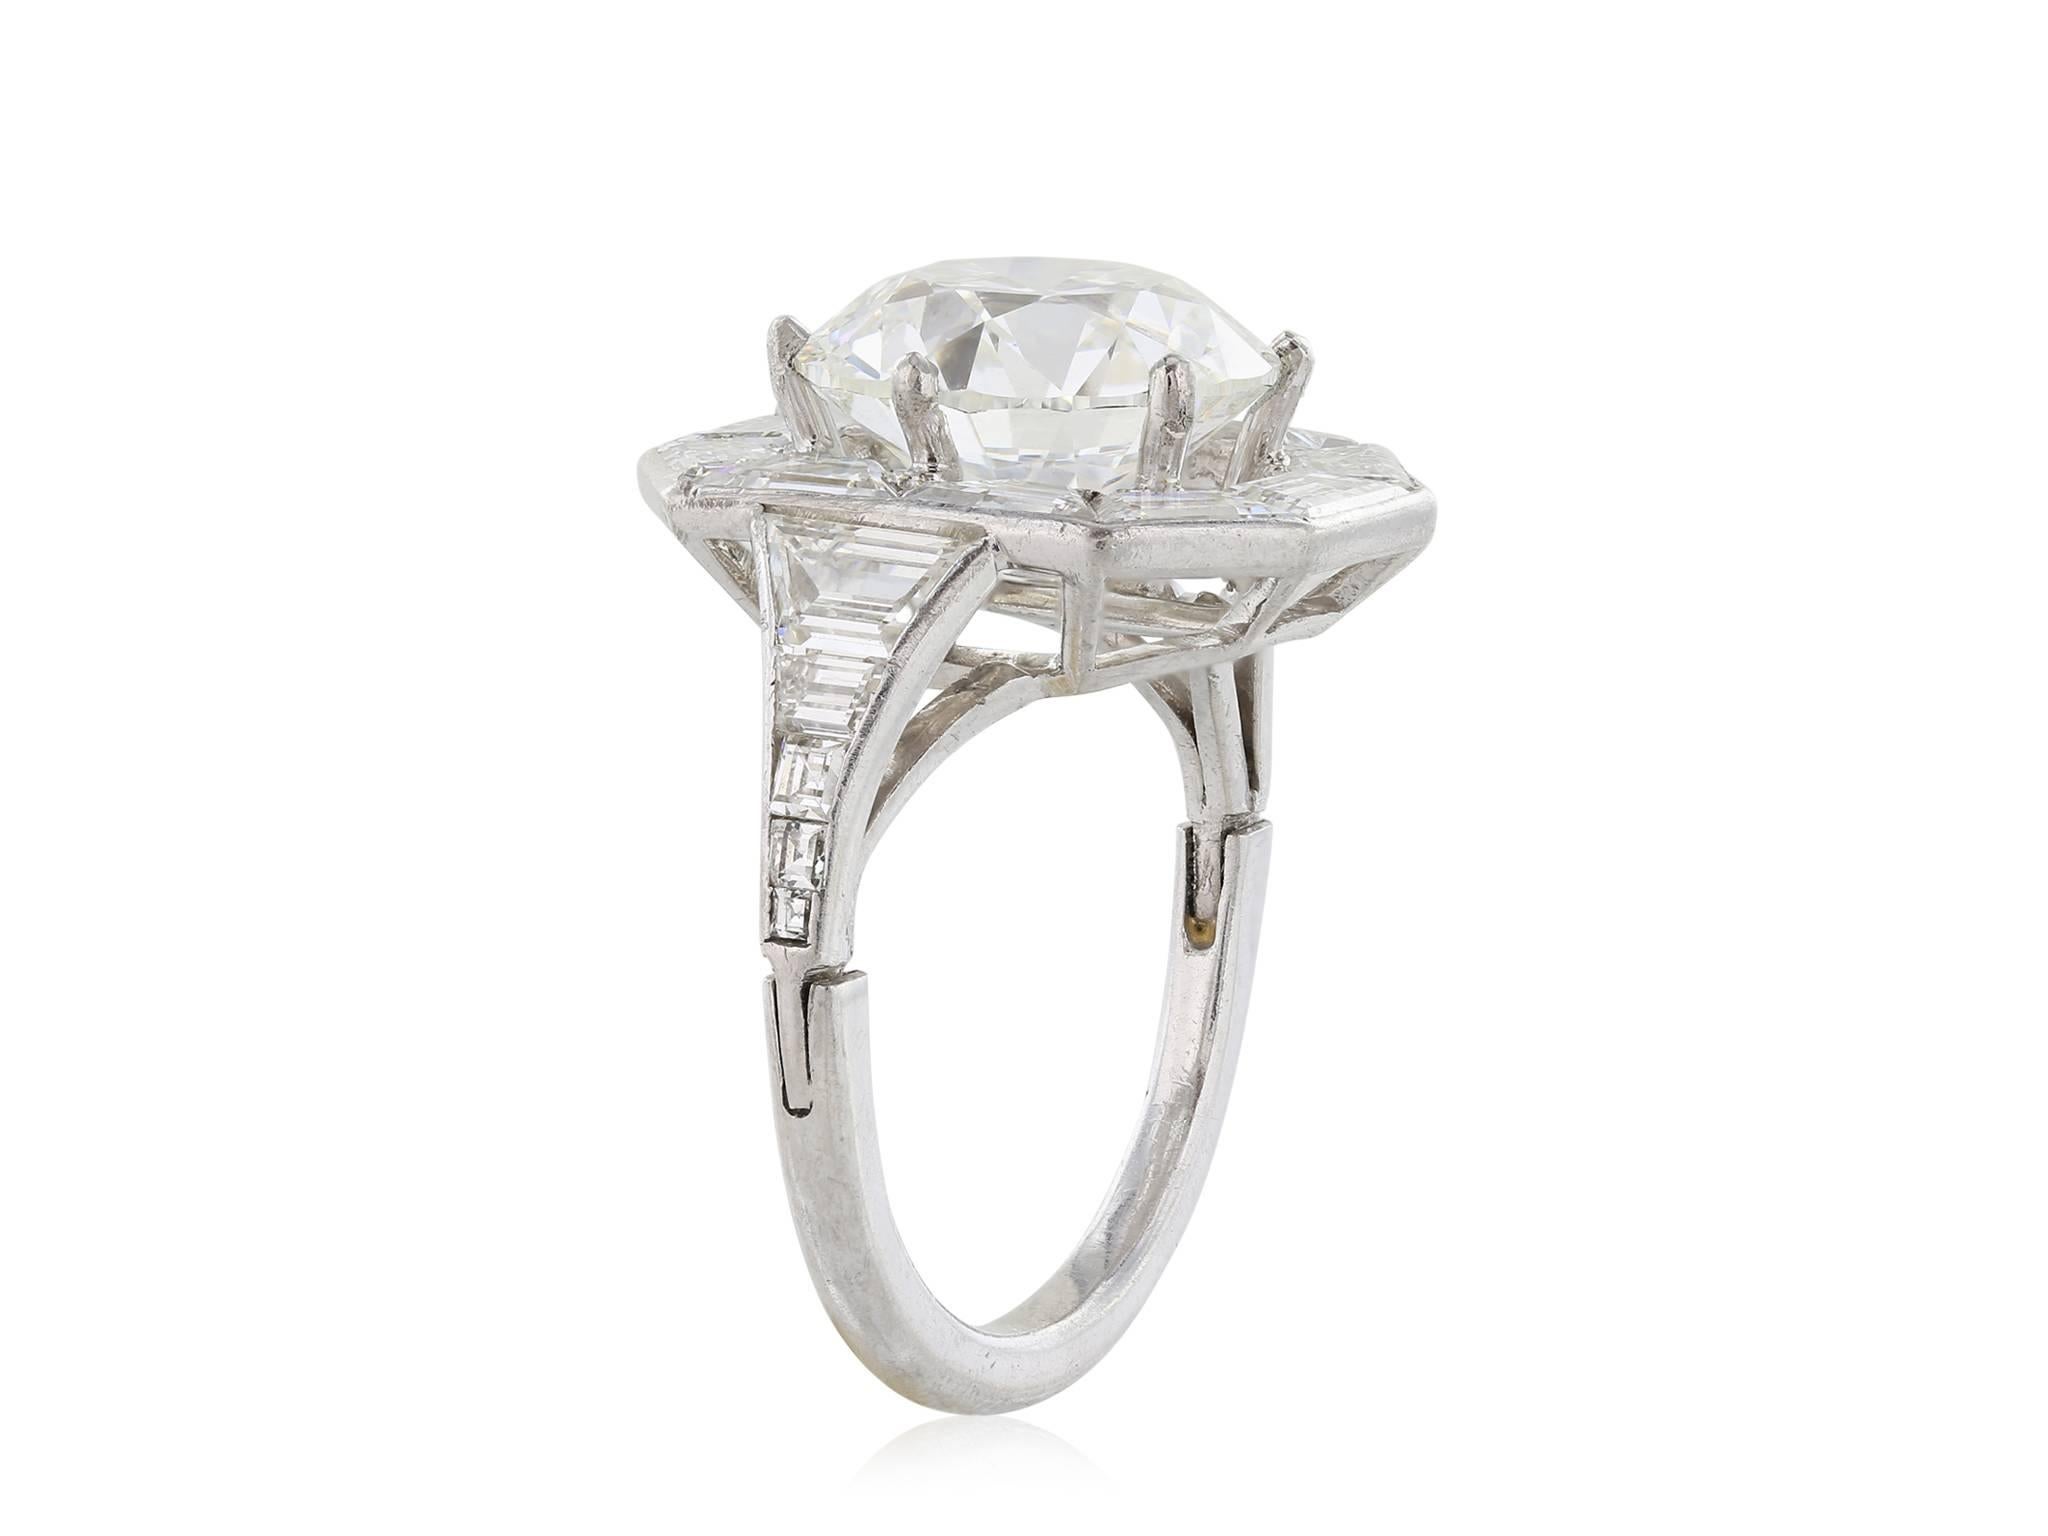 Platinum diamond ring, featuring one Old European Cut diamond weighing 4.92 with a color and clarity of I SI2 GIA report# 5171198148 carats set in a mounting with 20 baguettes weighing approximately 2.25CTW.